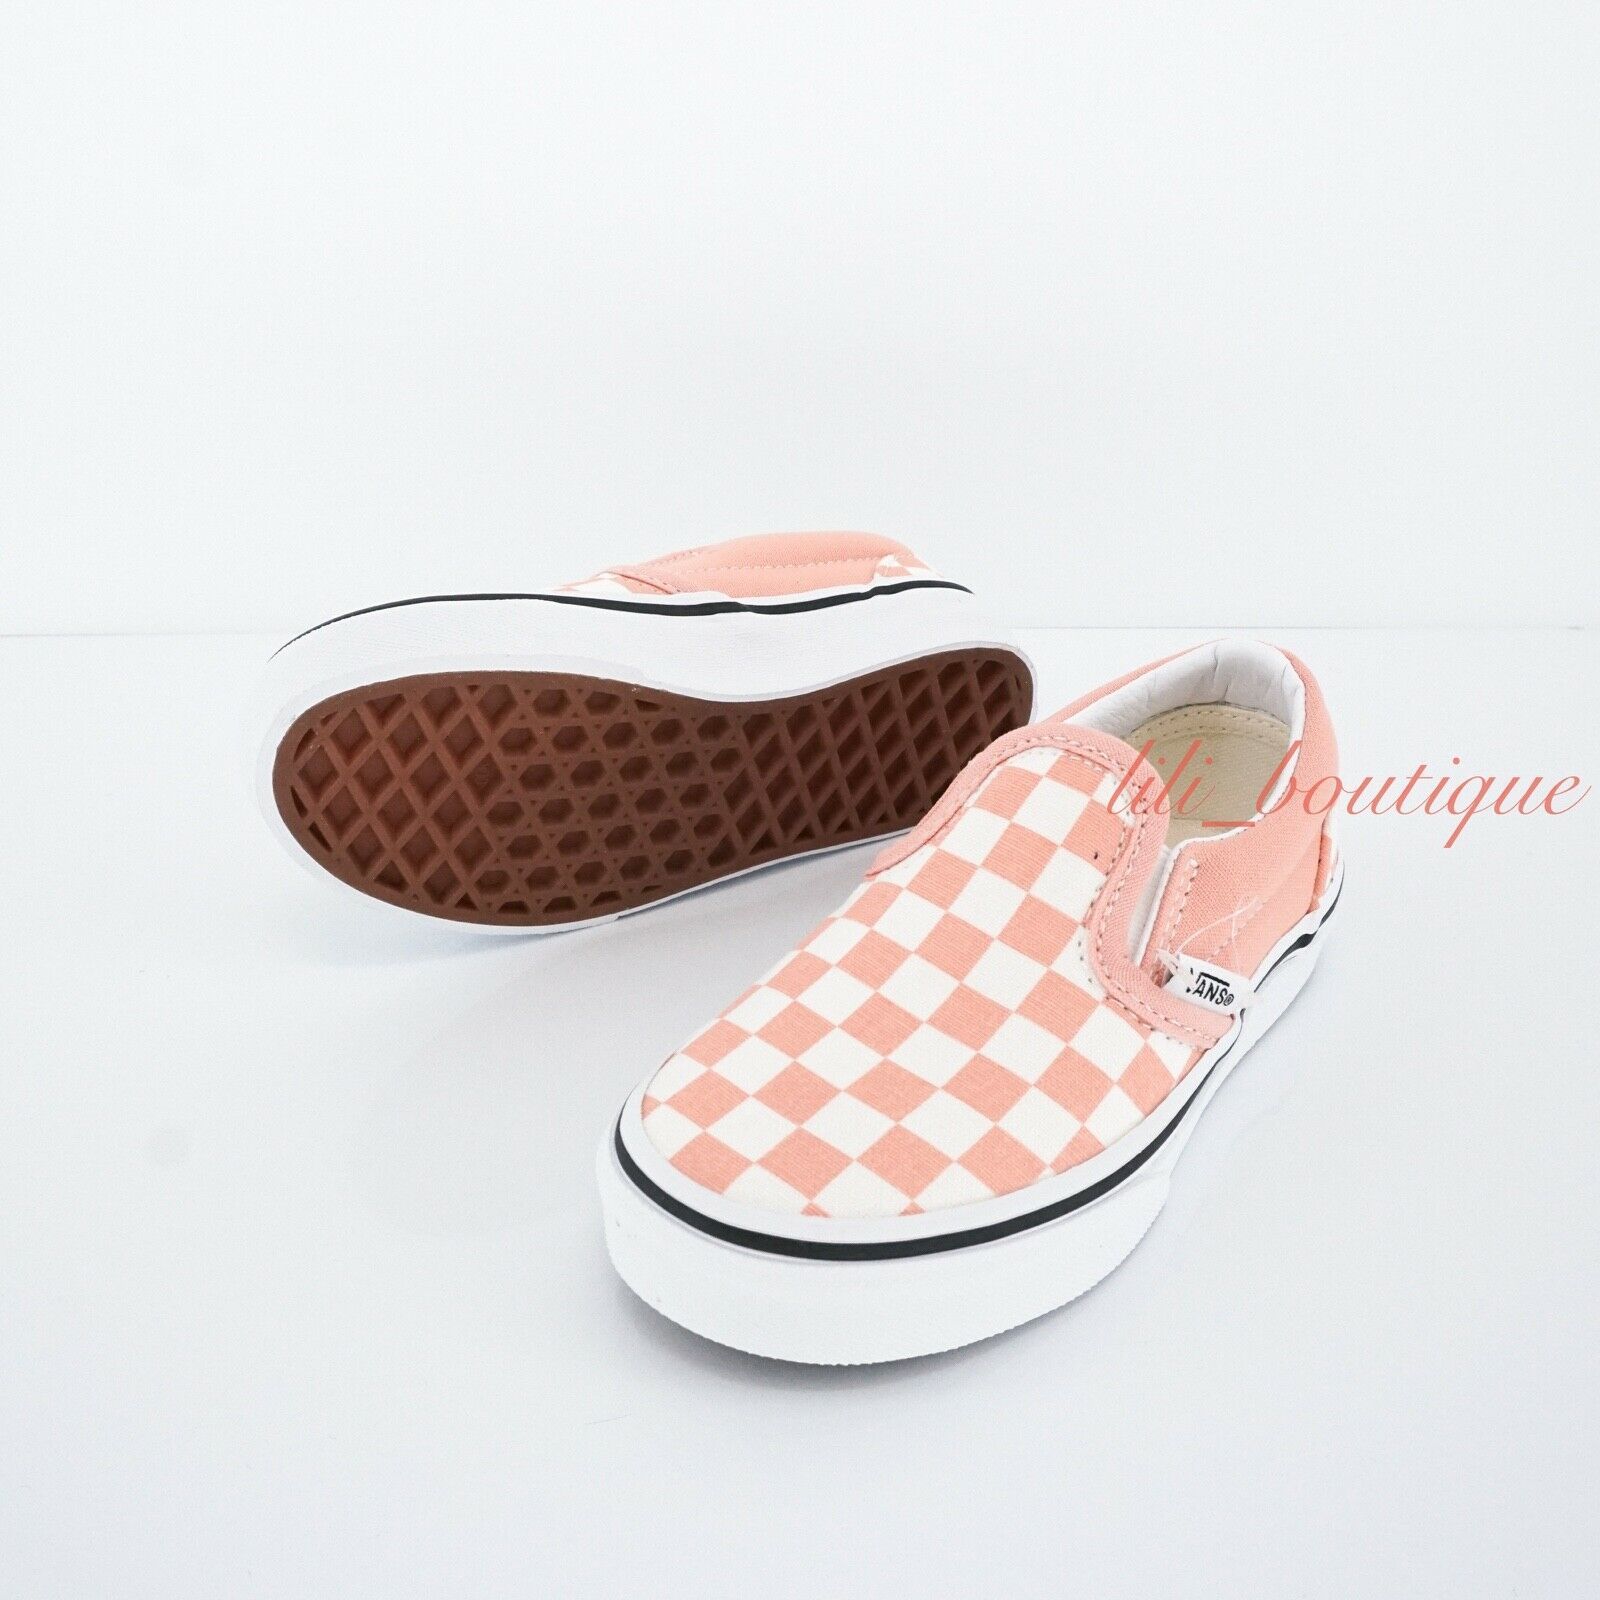 Primary image for No Box New Vans Kids Classic Slip-On Shoe Canvas Checkerboard Salmon White 10.5K